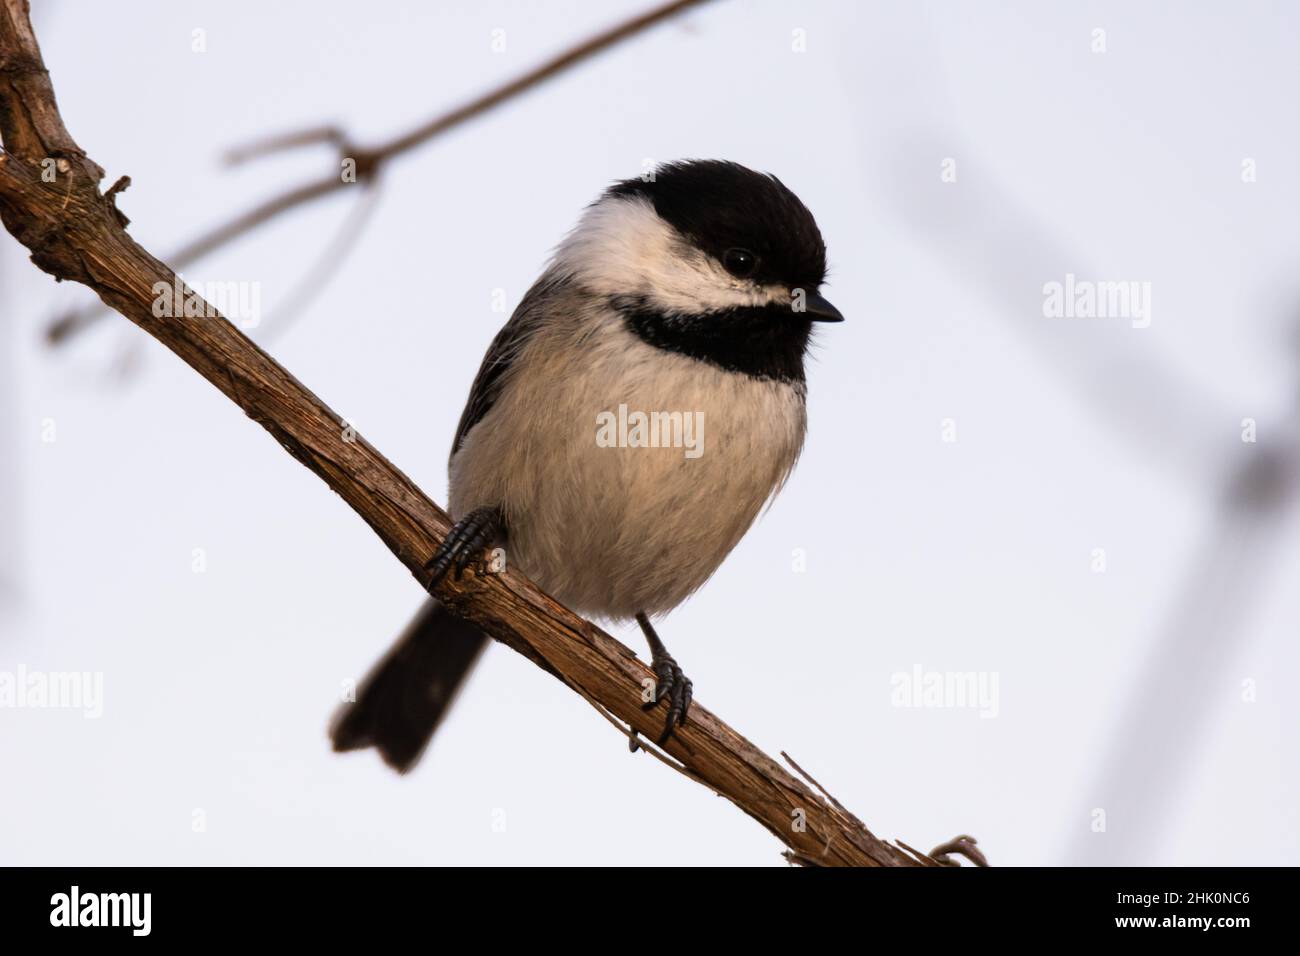 Black-capped chickadee perched on a tree branch Stock Photo